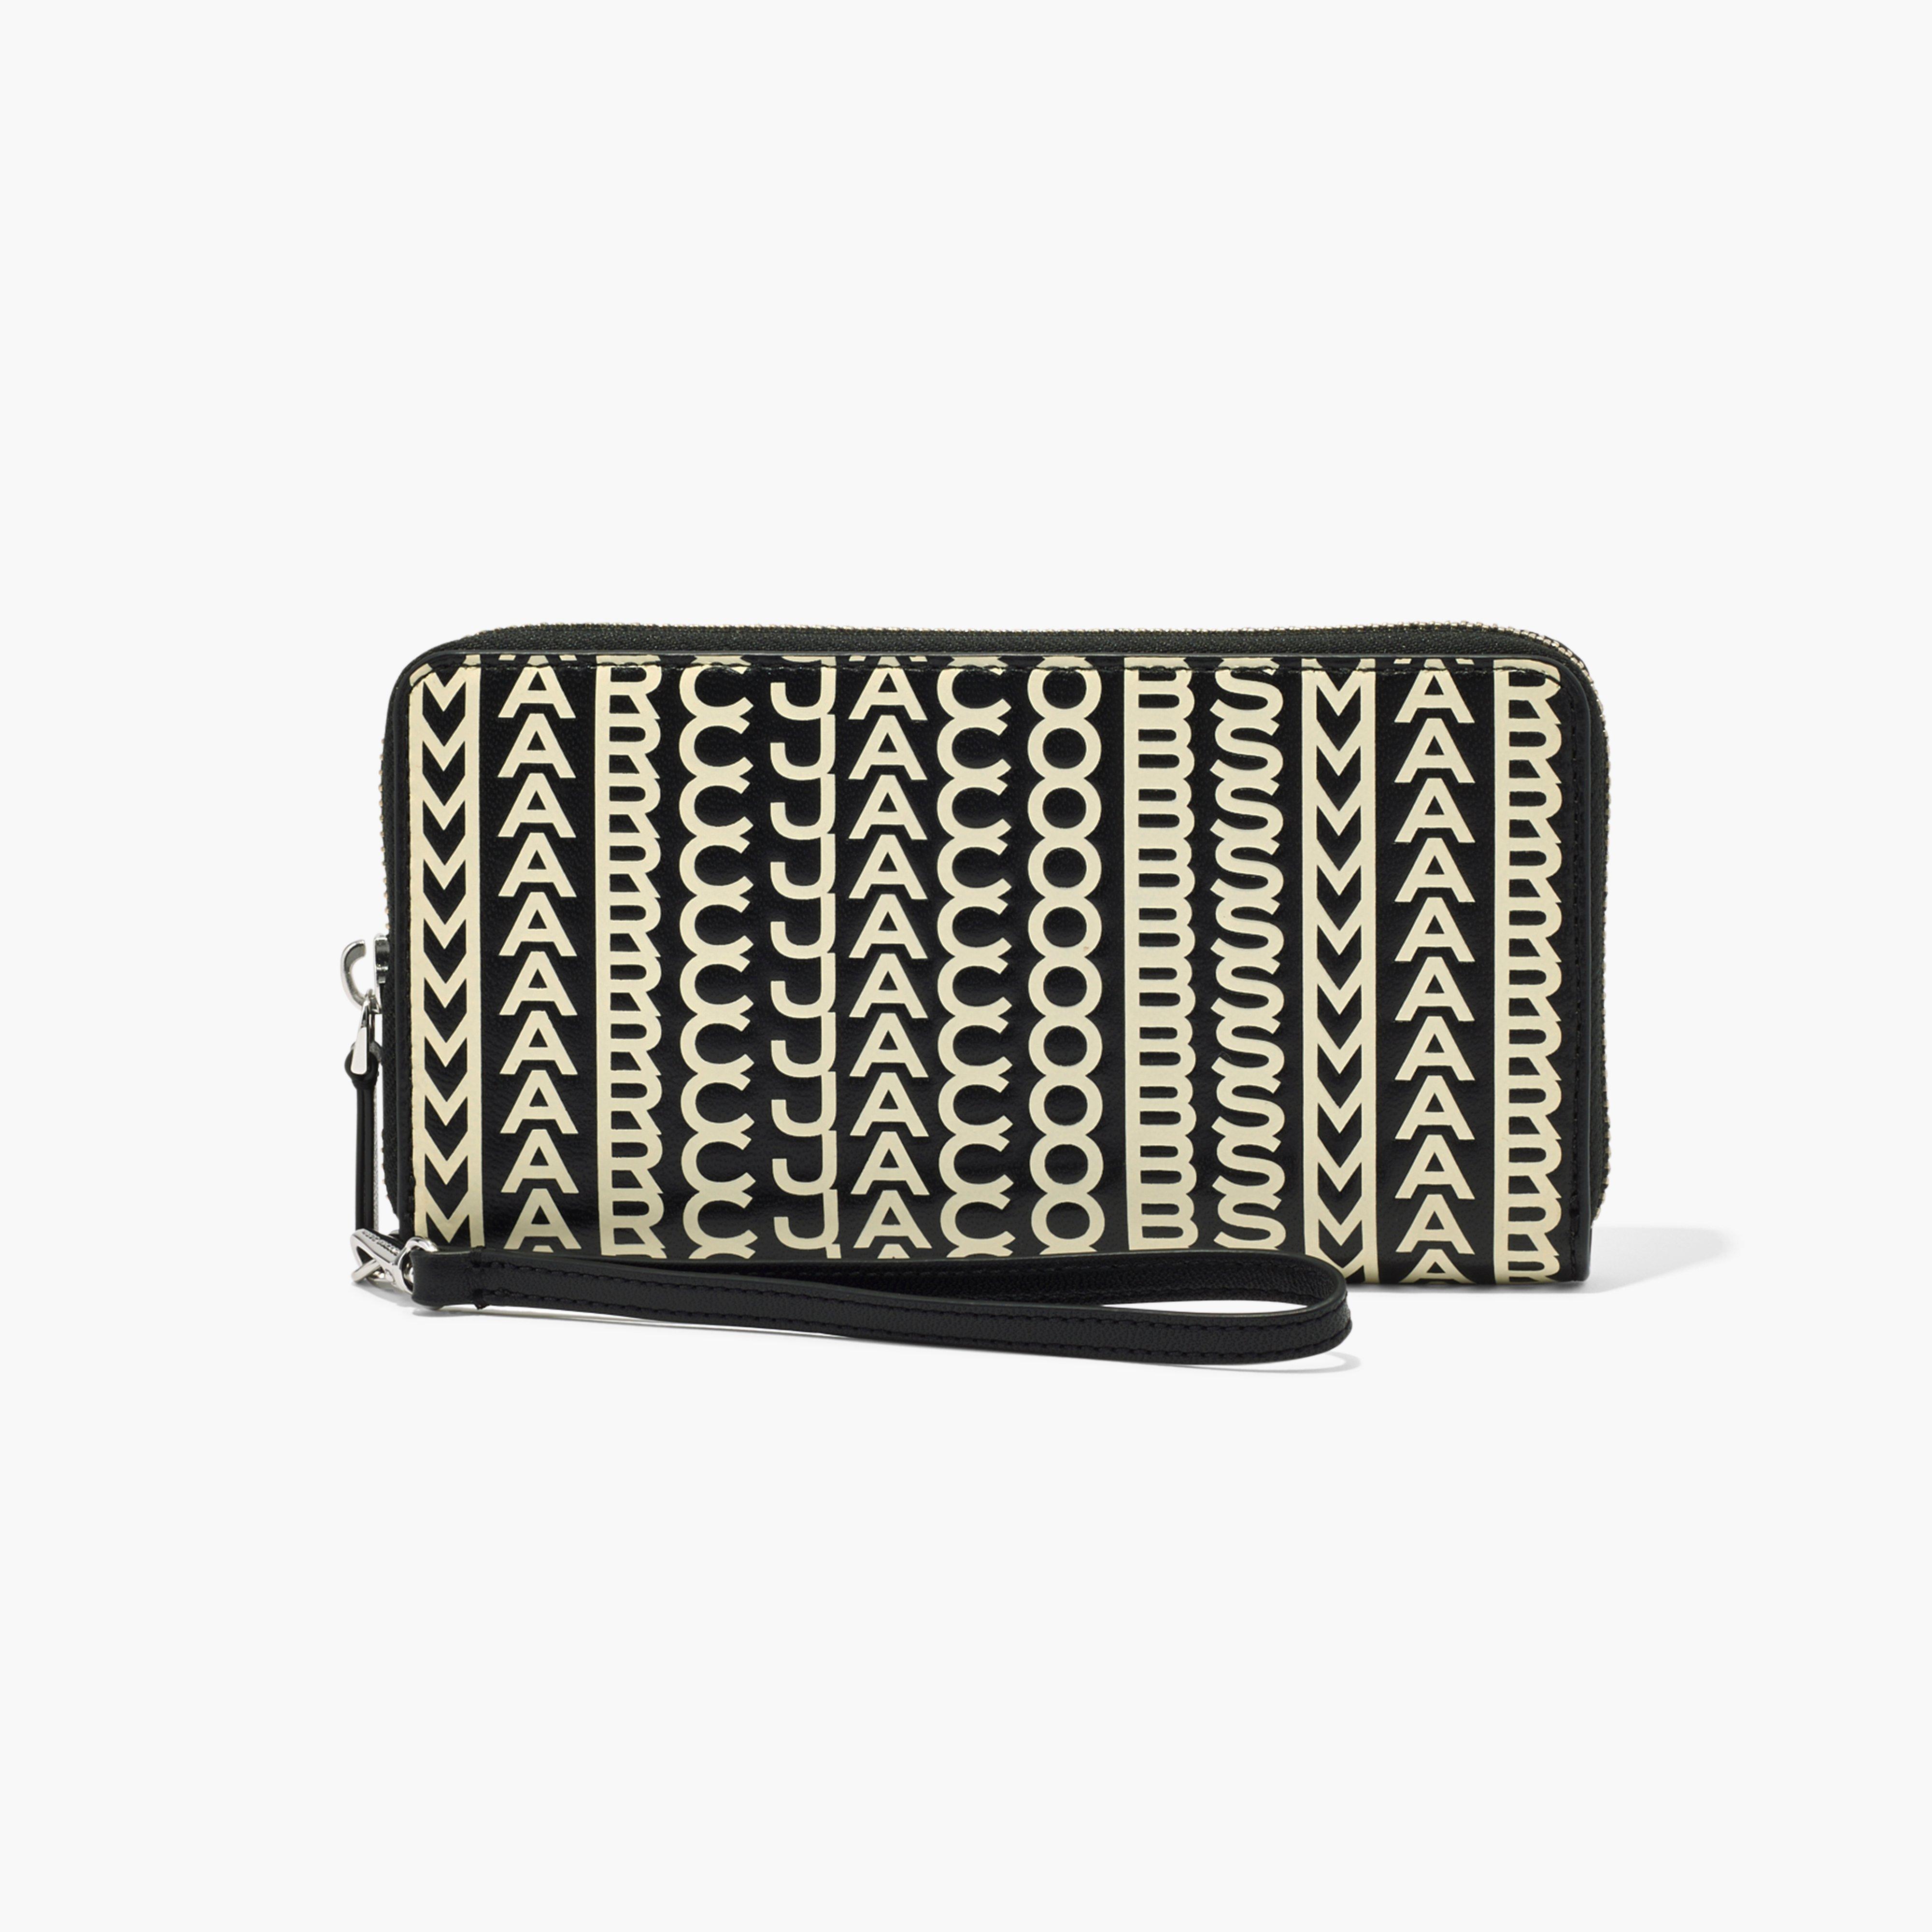 Marc by Marc jacobs The Monogram Leather Continental Wristlet Wallet,BLACK/WHITE